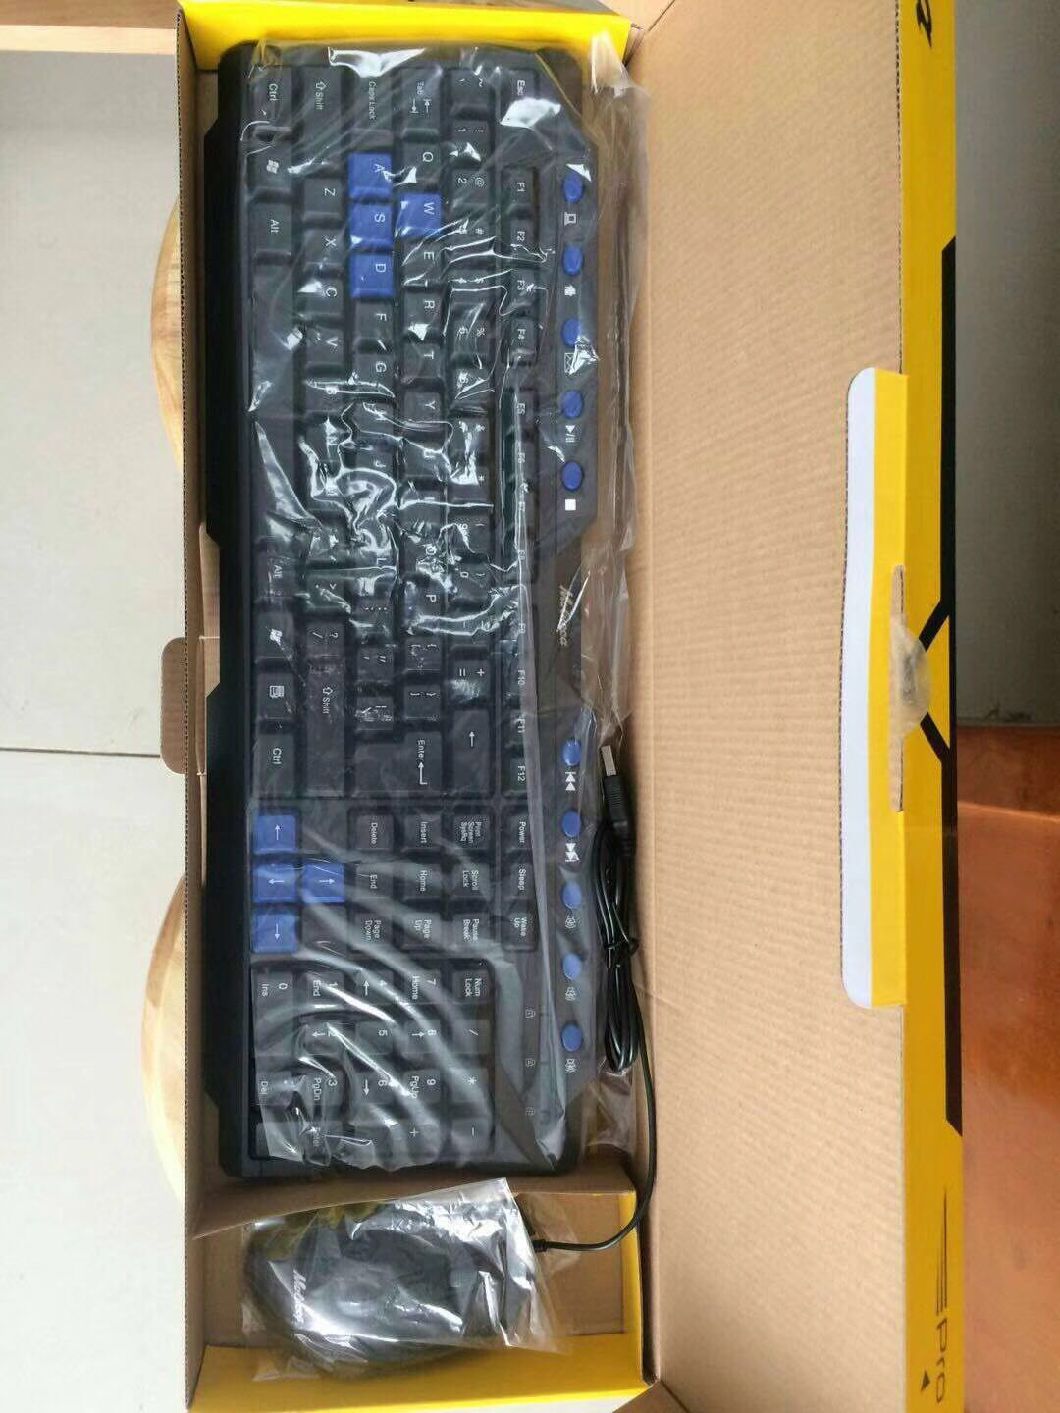 Stocks for Keyboard and Mouse, Computer Keyboard, Computer Parts, Waterproof, 15000sets